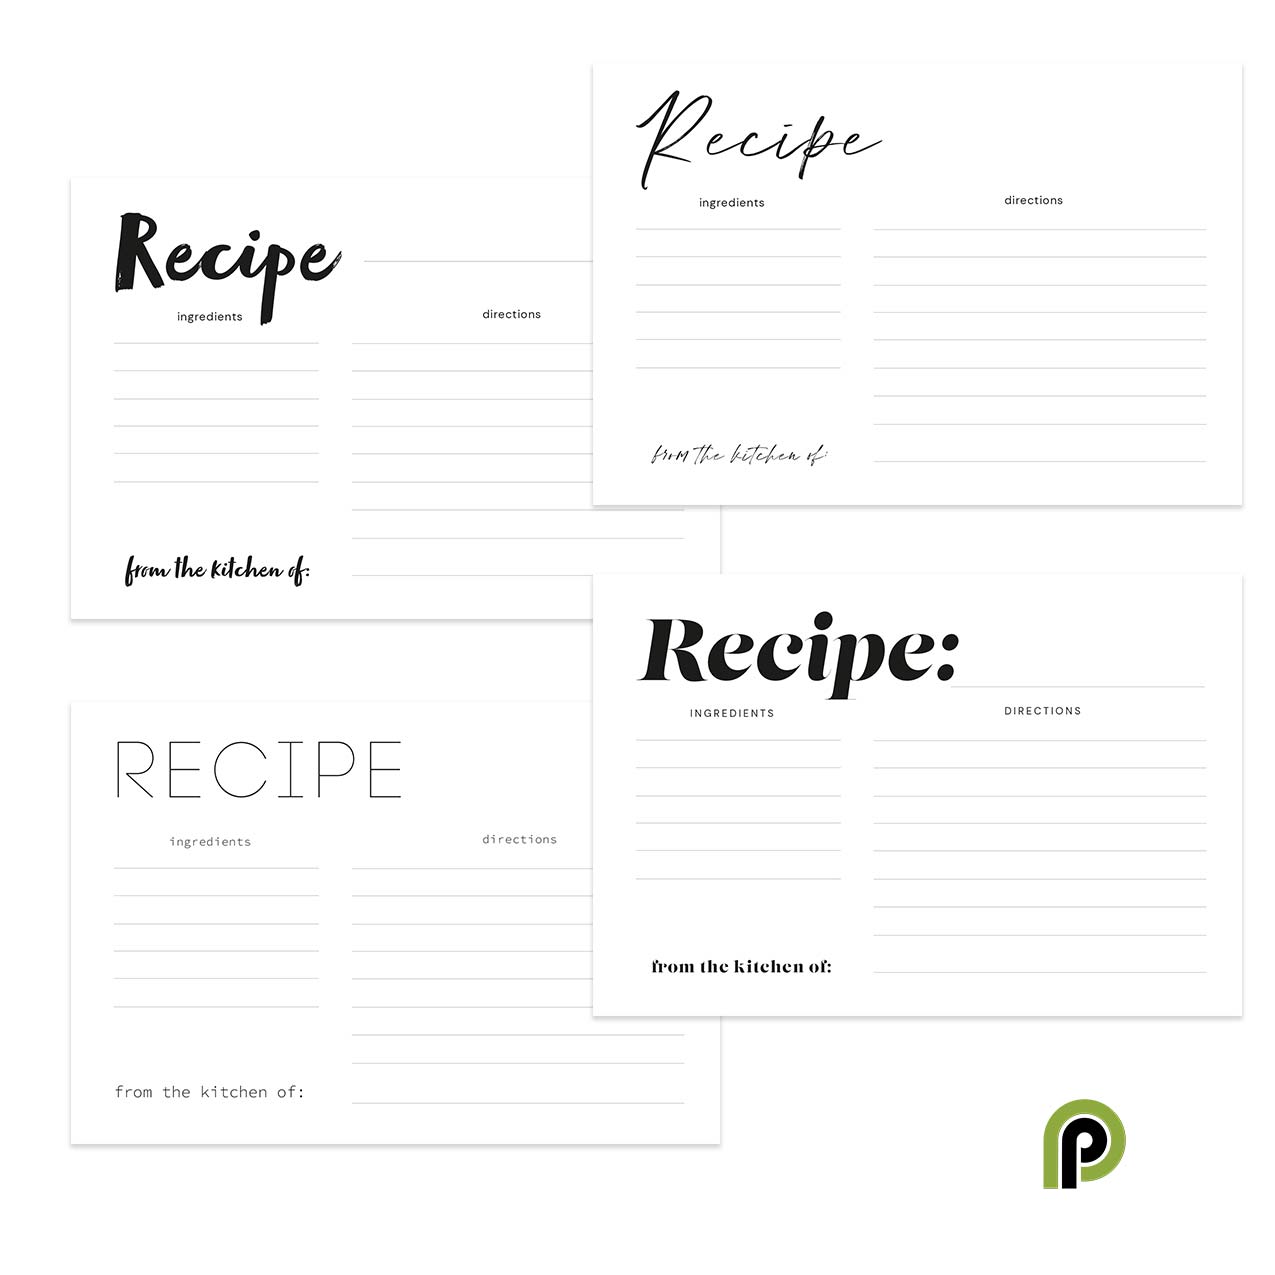 https://www.persnicketyprints.com/wp-content/uploads/2021/07/free-recipe-cards.jpg